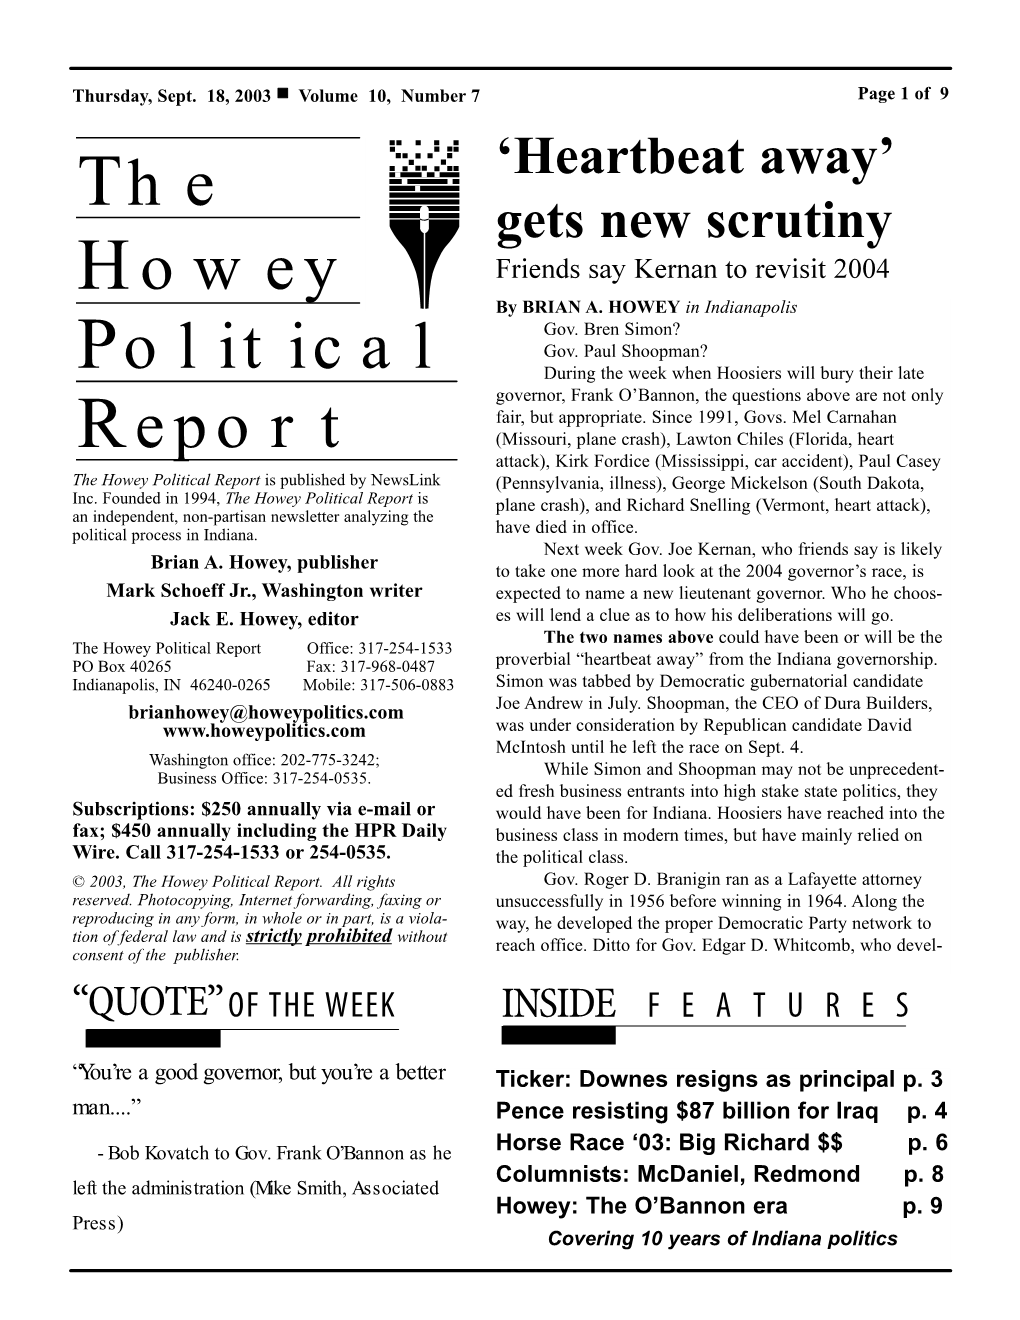 The Howey Political Report Is Published by Newslink (Pennsylvania, Illness), George Mickelson (South Dakota, Inc